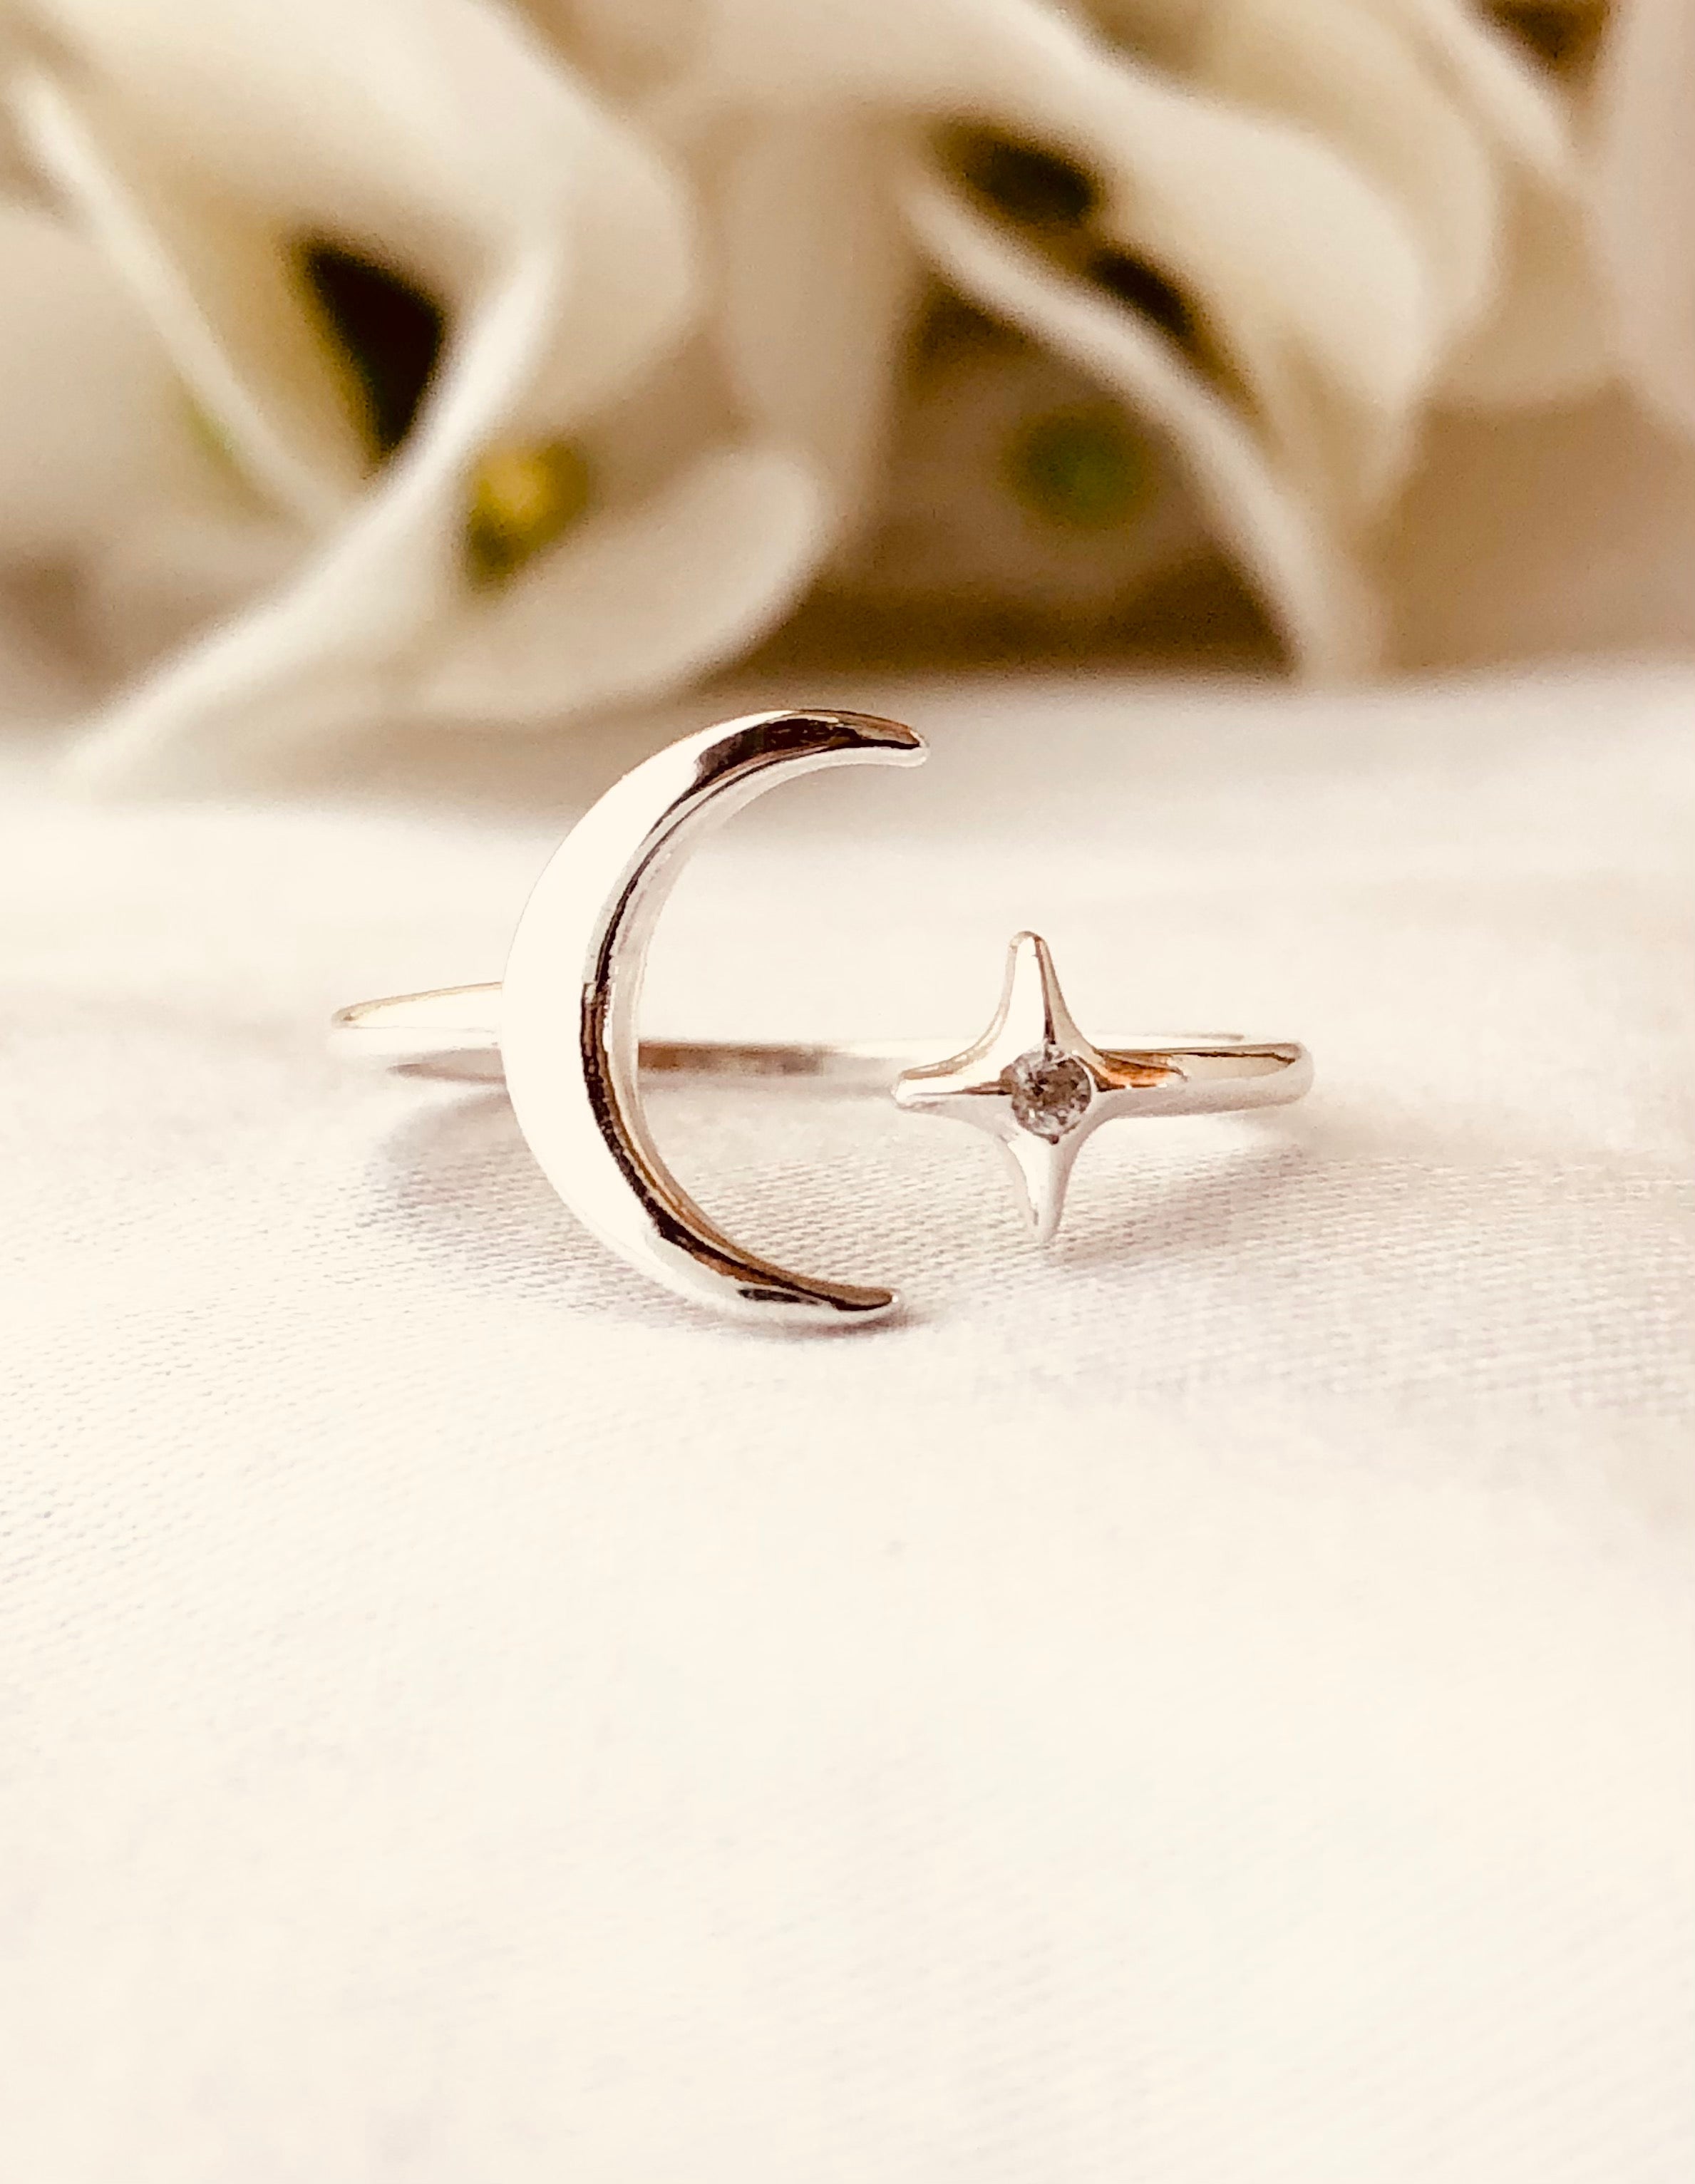 Buy Dainty Gold Moon Star Ring, Crescent Moon Ring, Sterling Silver Women  Ring, Boho Chic, Midi Ring, Adjustable Ring Online in India - Etsy